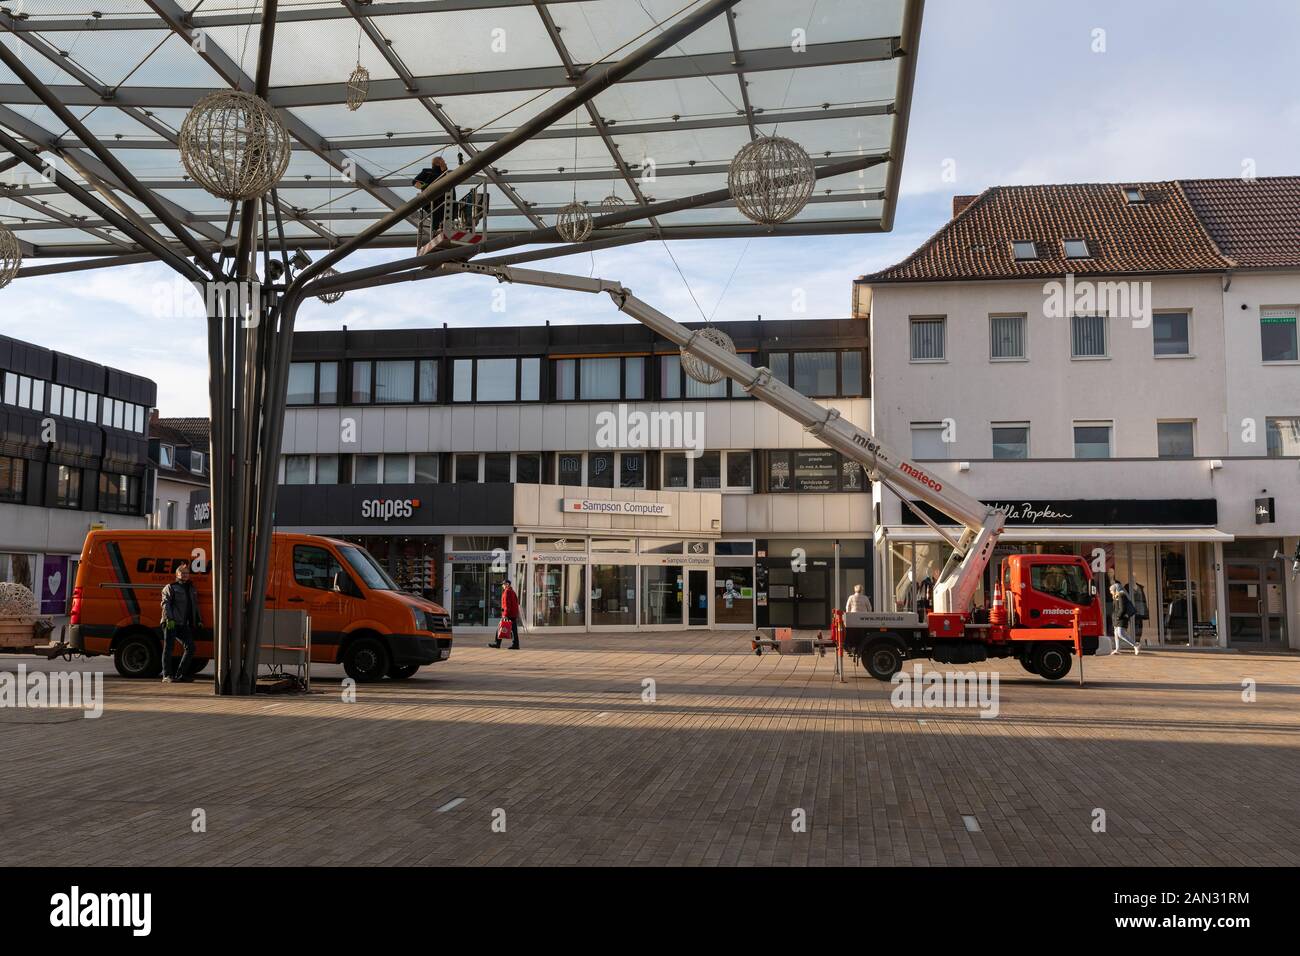 Best sign of christmas being over is when decoration disappear. Workers taking down christmas lights in Wolfsburg, Germany. Stock Photo